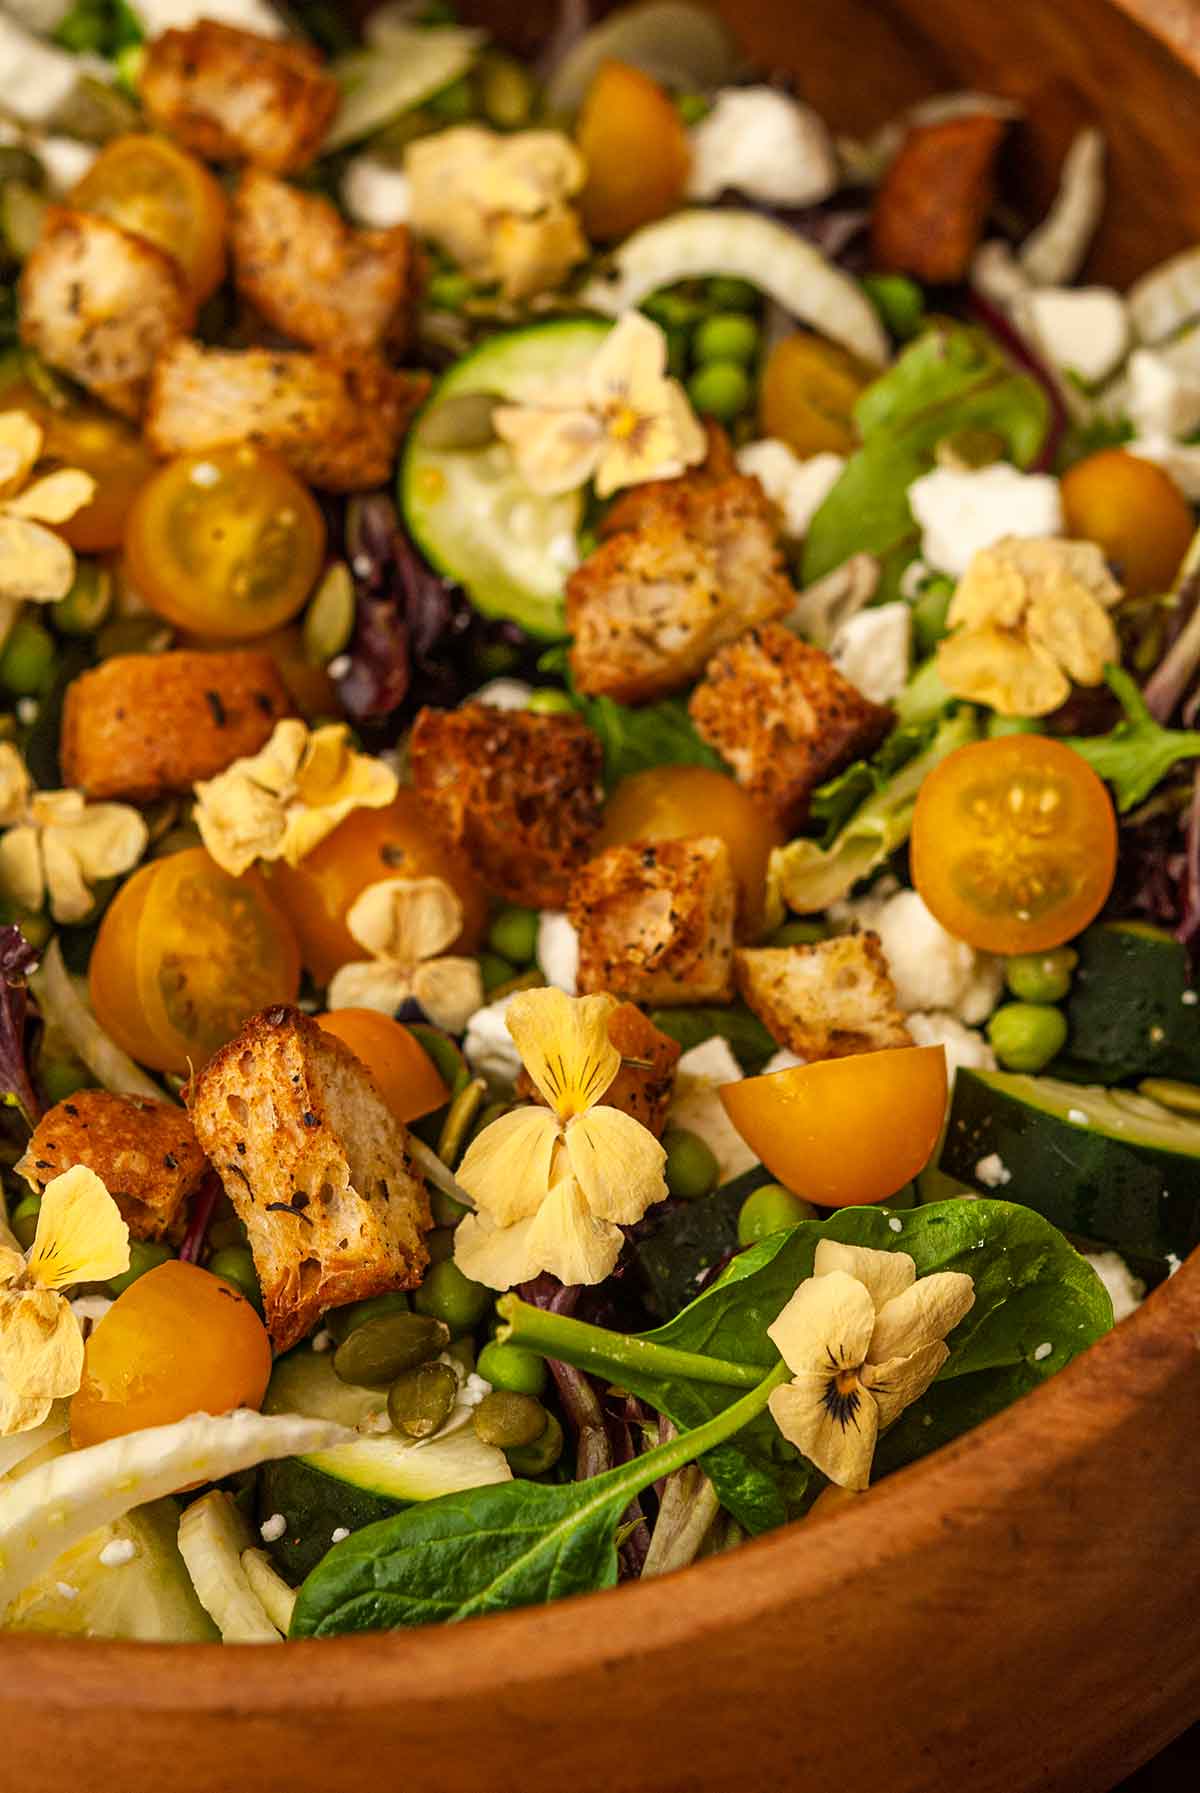 The vegetables and croutons in a salad.